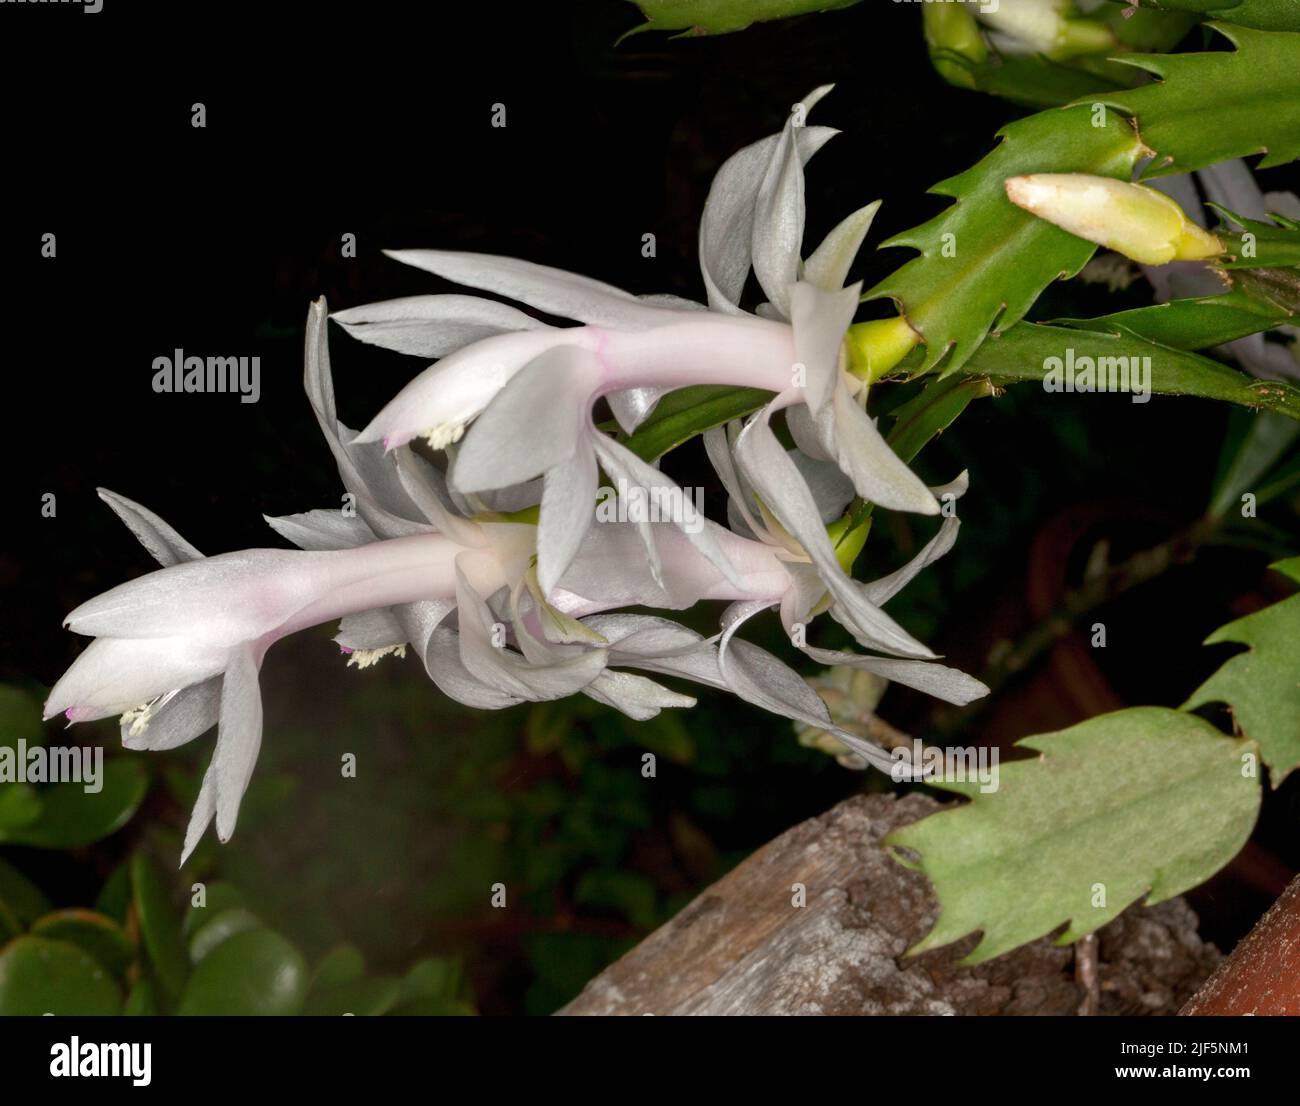 Spectacular white flowers and green leaves of Christmas cactus, Schlumbergera truncata 'White Christmas', an epiphytic plant, against dark background Stock Photo